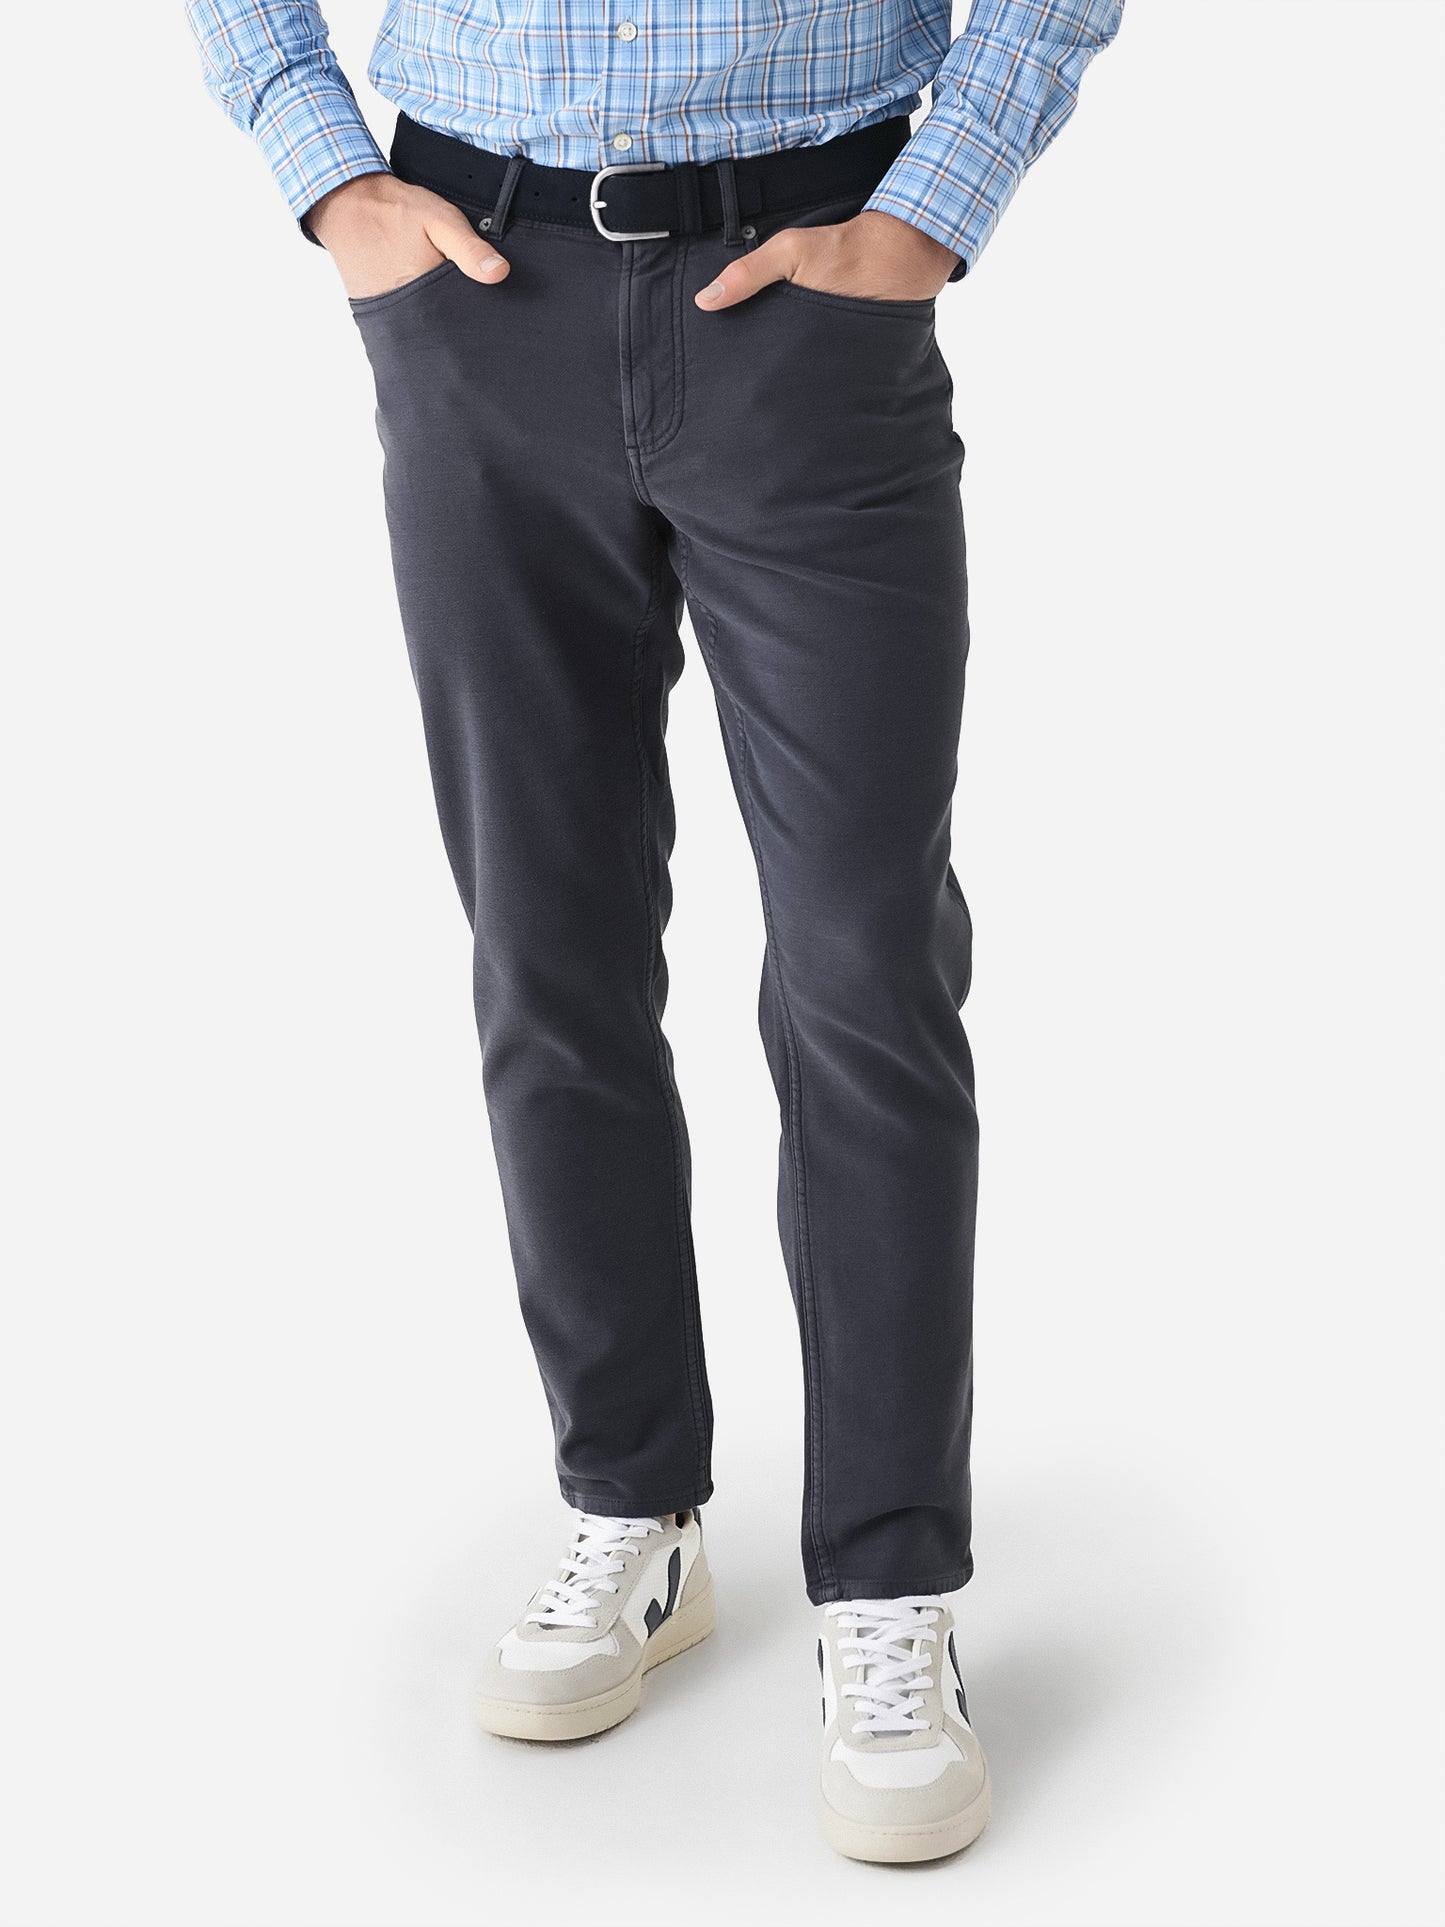 Faherty Brand Men's Stretch Terry 5 Pocket Pant